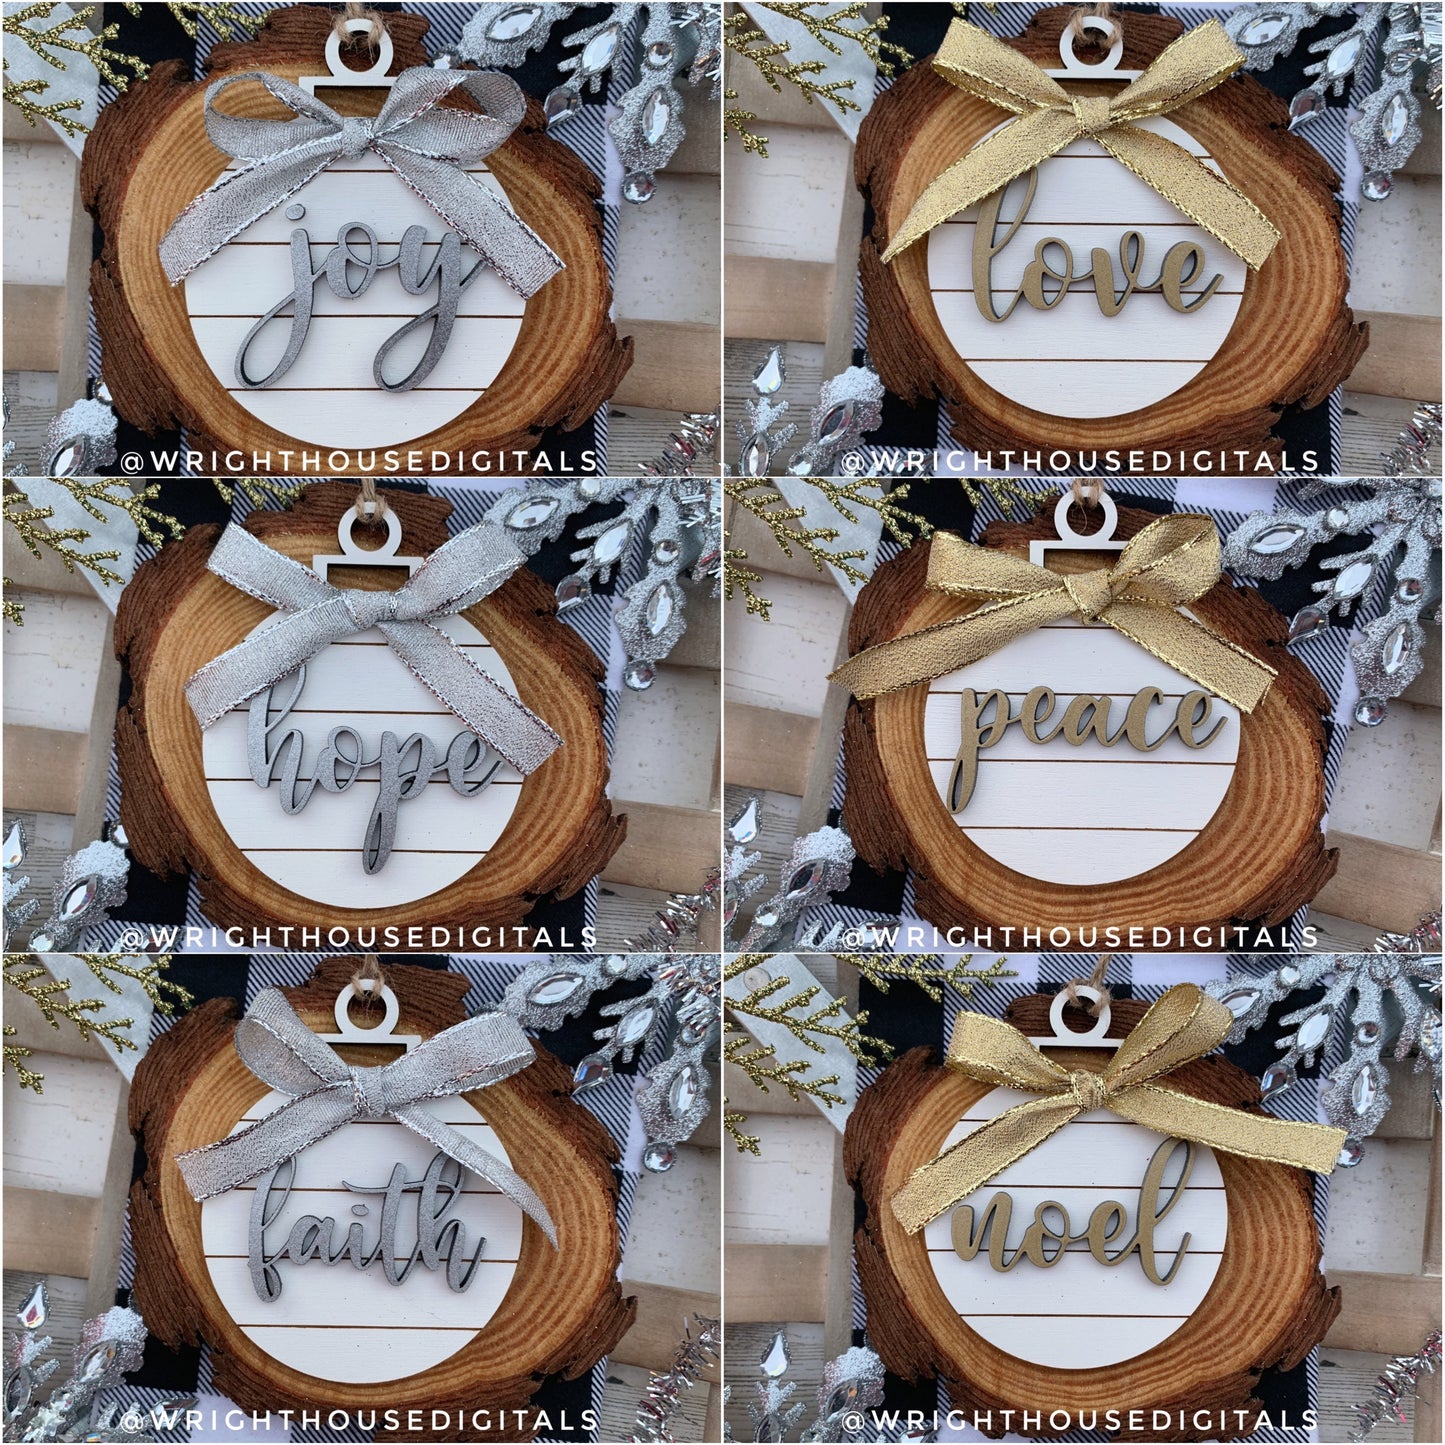 Classic Shiplap Wooden Christmas Tree Ball Ornament Set of 6 - Laser Cut - Stocking Stuffer - Present Tag - Gift Wrapping Accessory